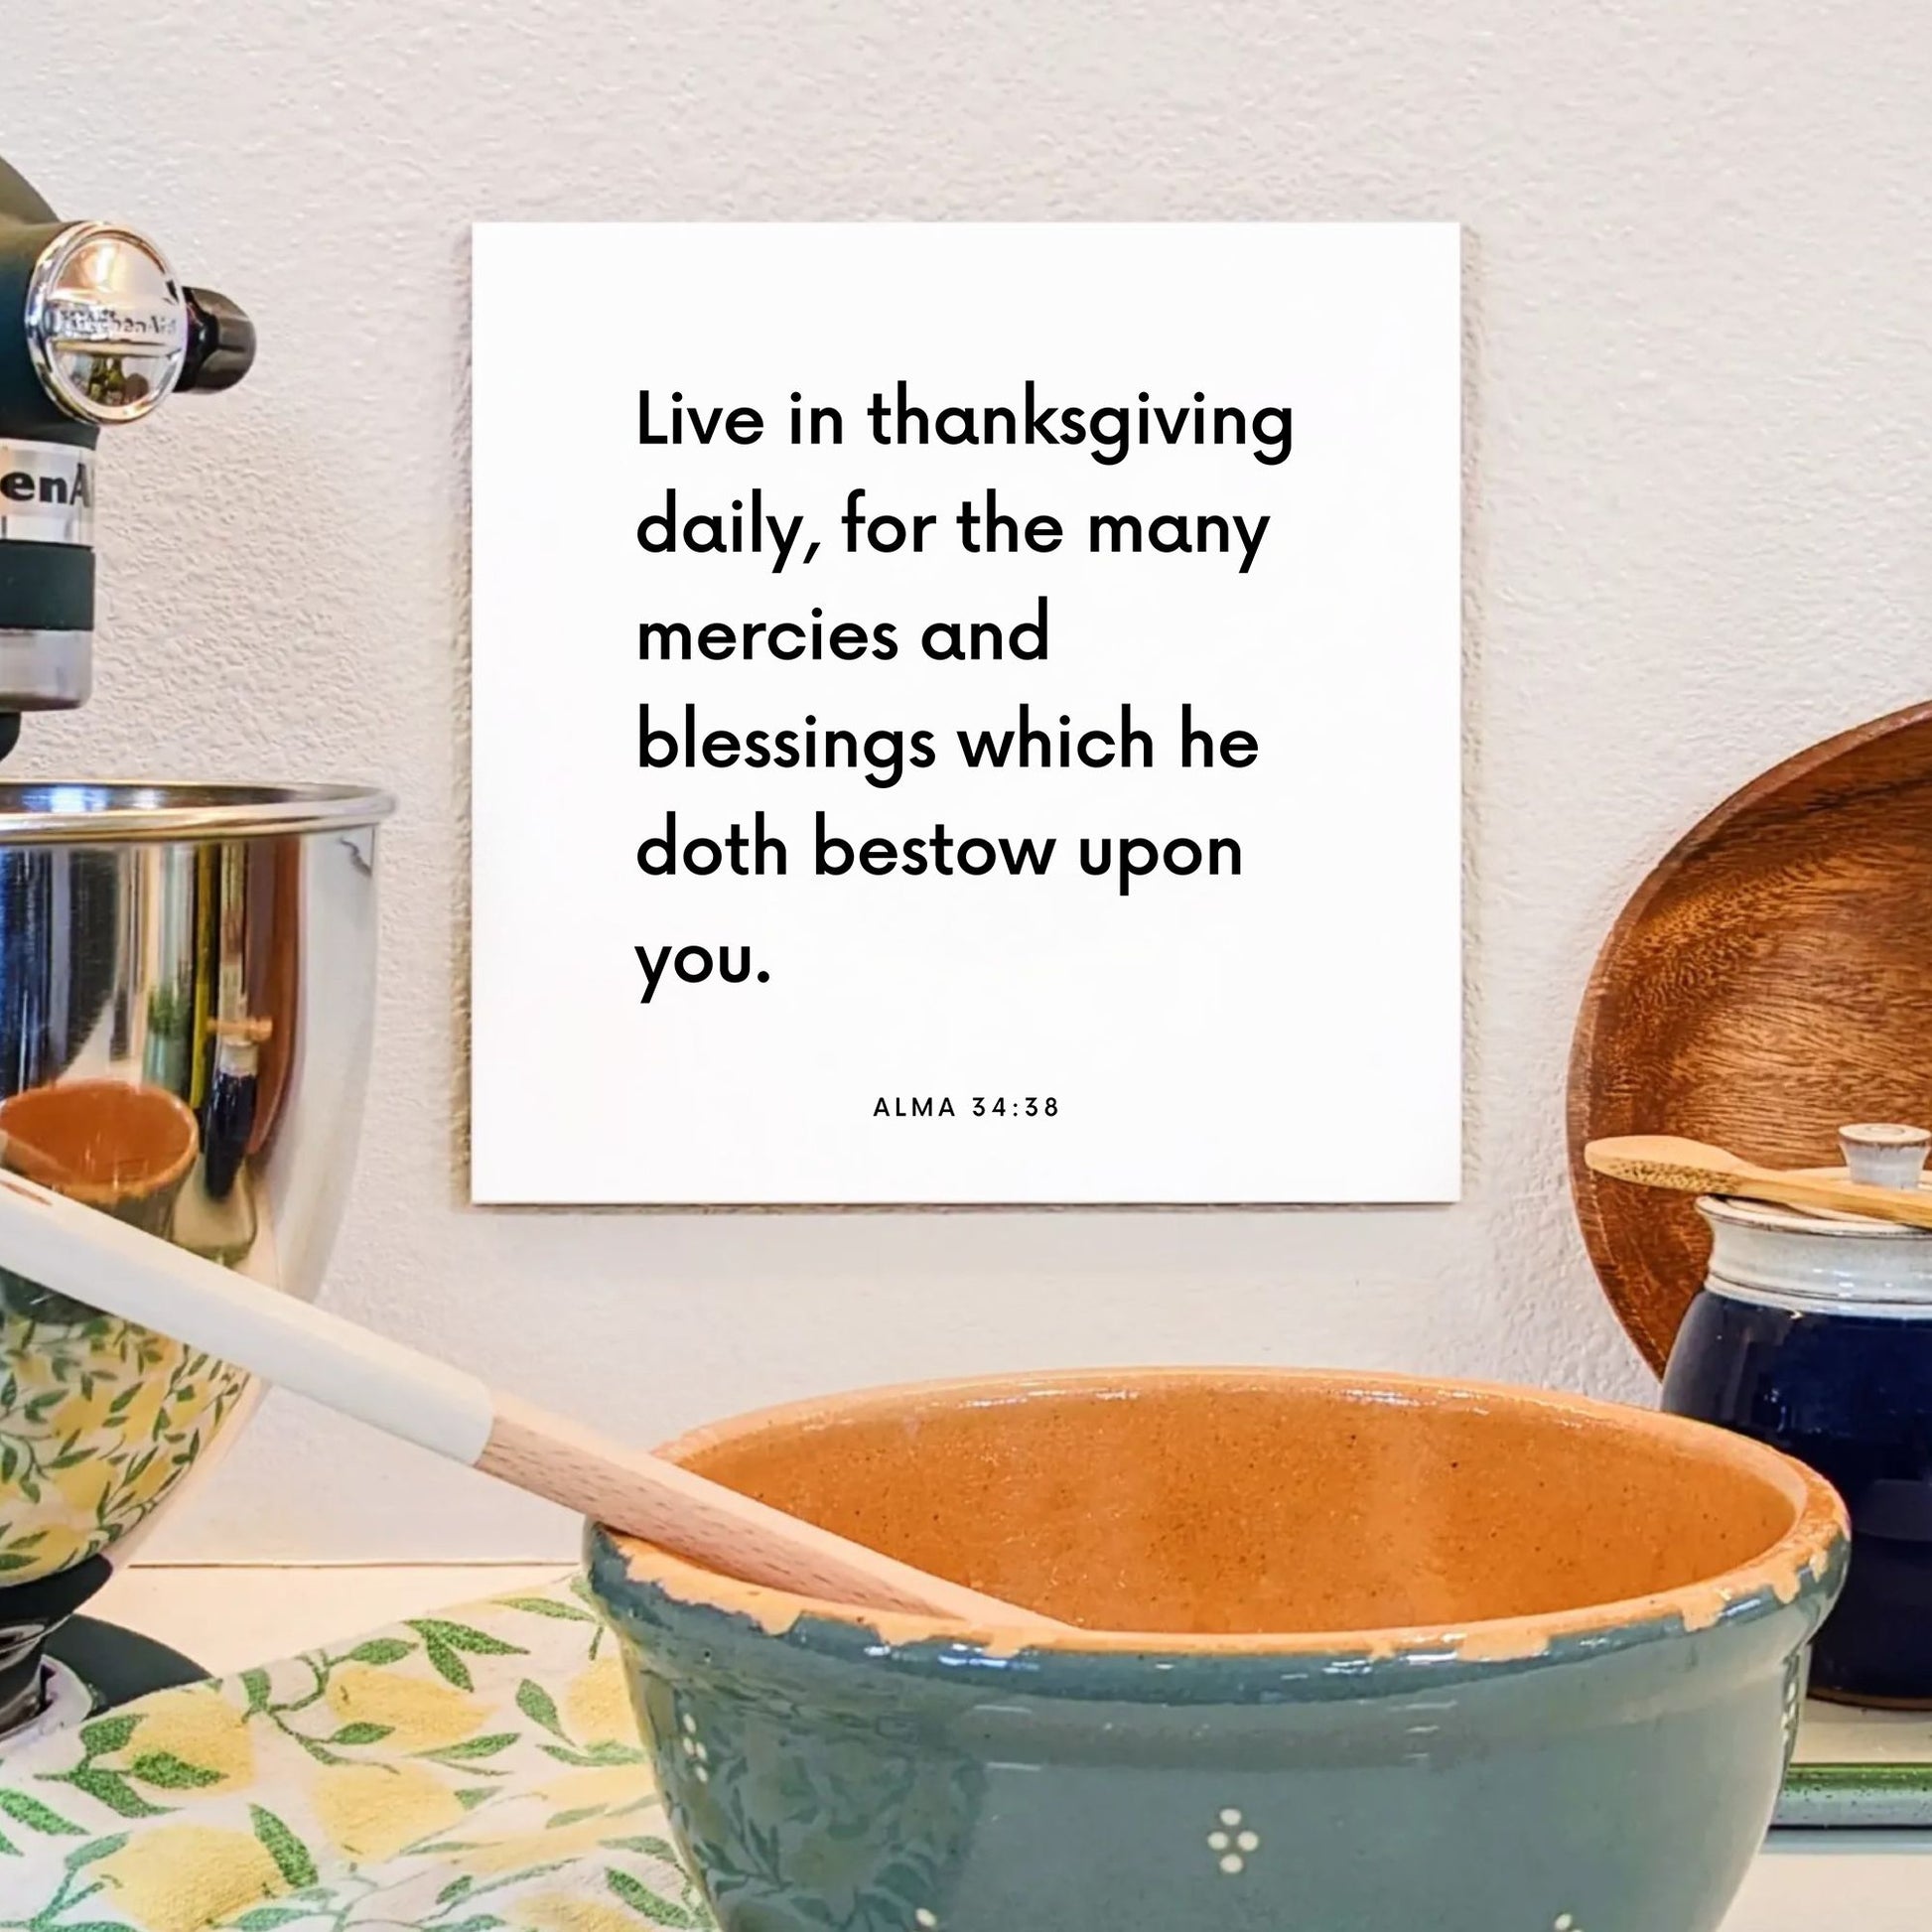 Kitchen mouting of the scripture tile for Alma 34:38 - "Live in thanksgiving daily, for the many mercies"